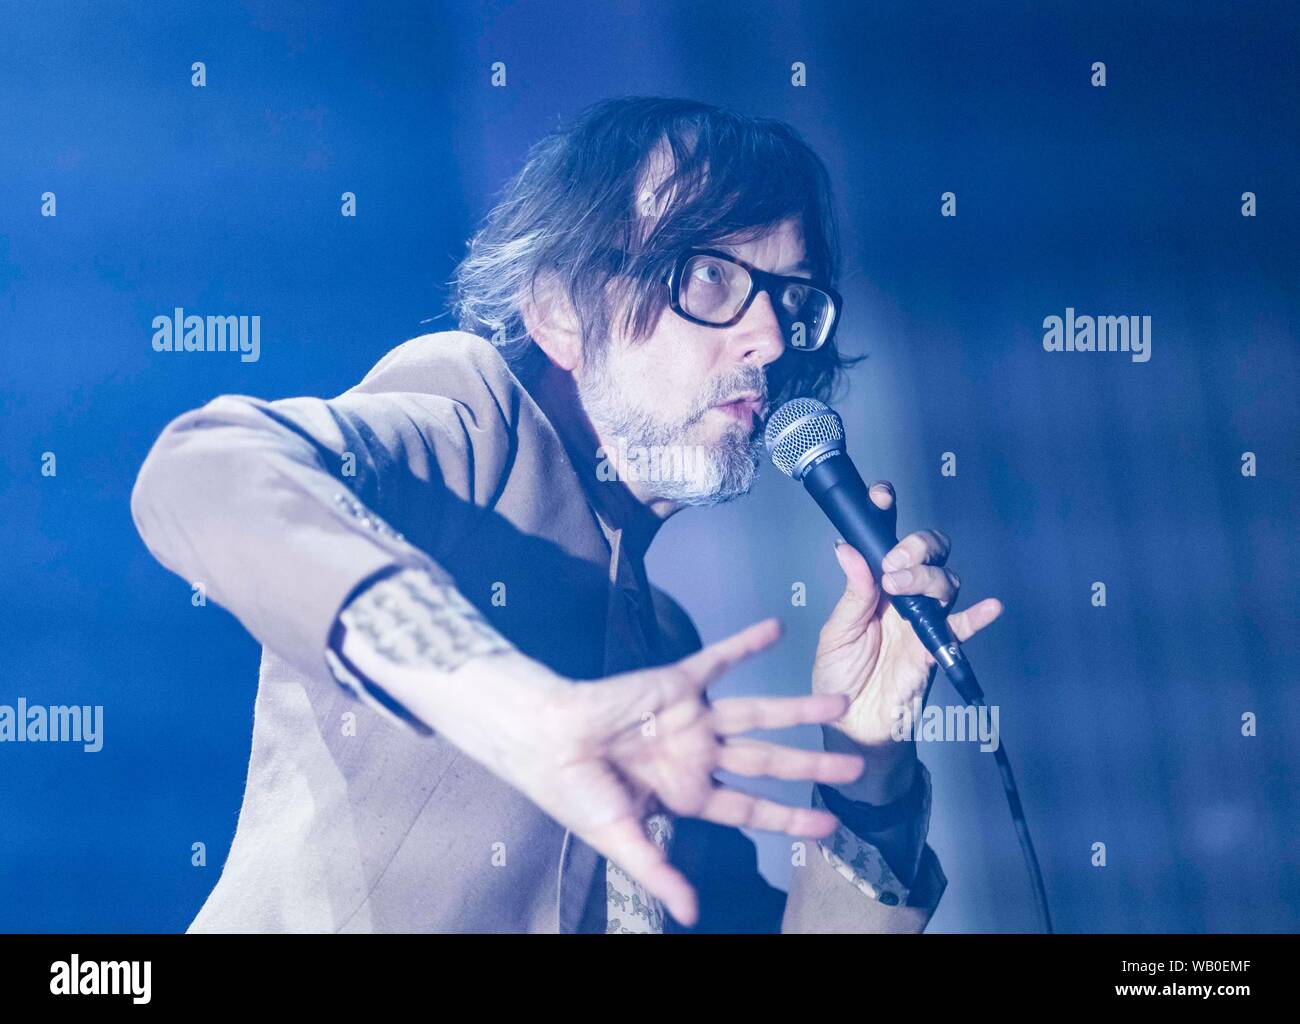 Edinburgh, UK. 22 August, 2019 The inimitable Pulp frontman and solo artist, Jarvis Cocker remains a startlingly vital force in music, playing songs from his glittering career. He returns to the International Festival with his new project JARV IS Credit: Rich Dyson/Alamy Live News Stock Photo